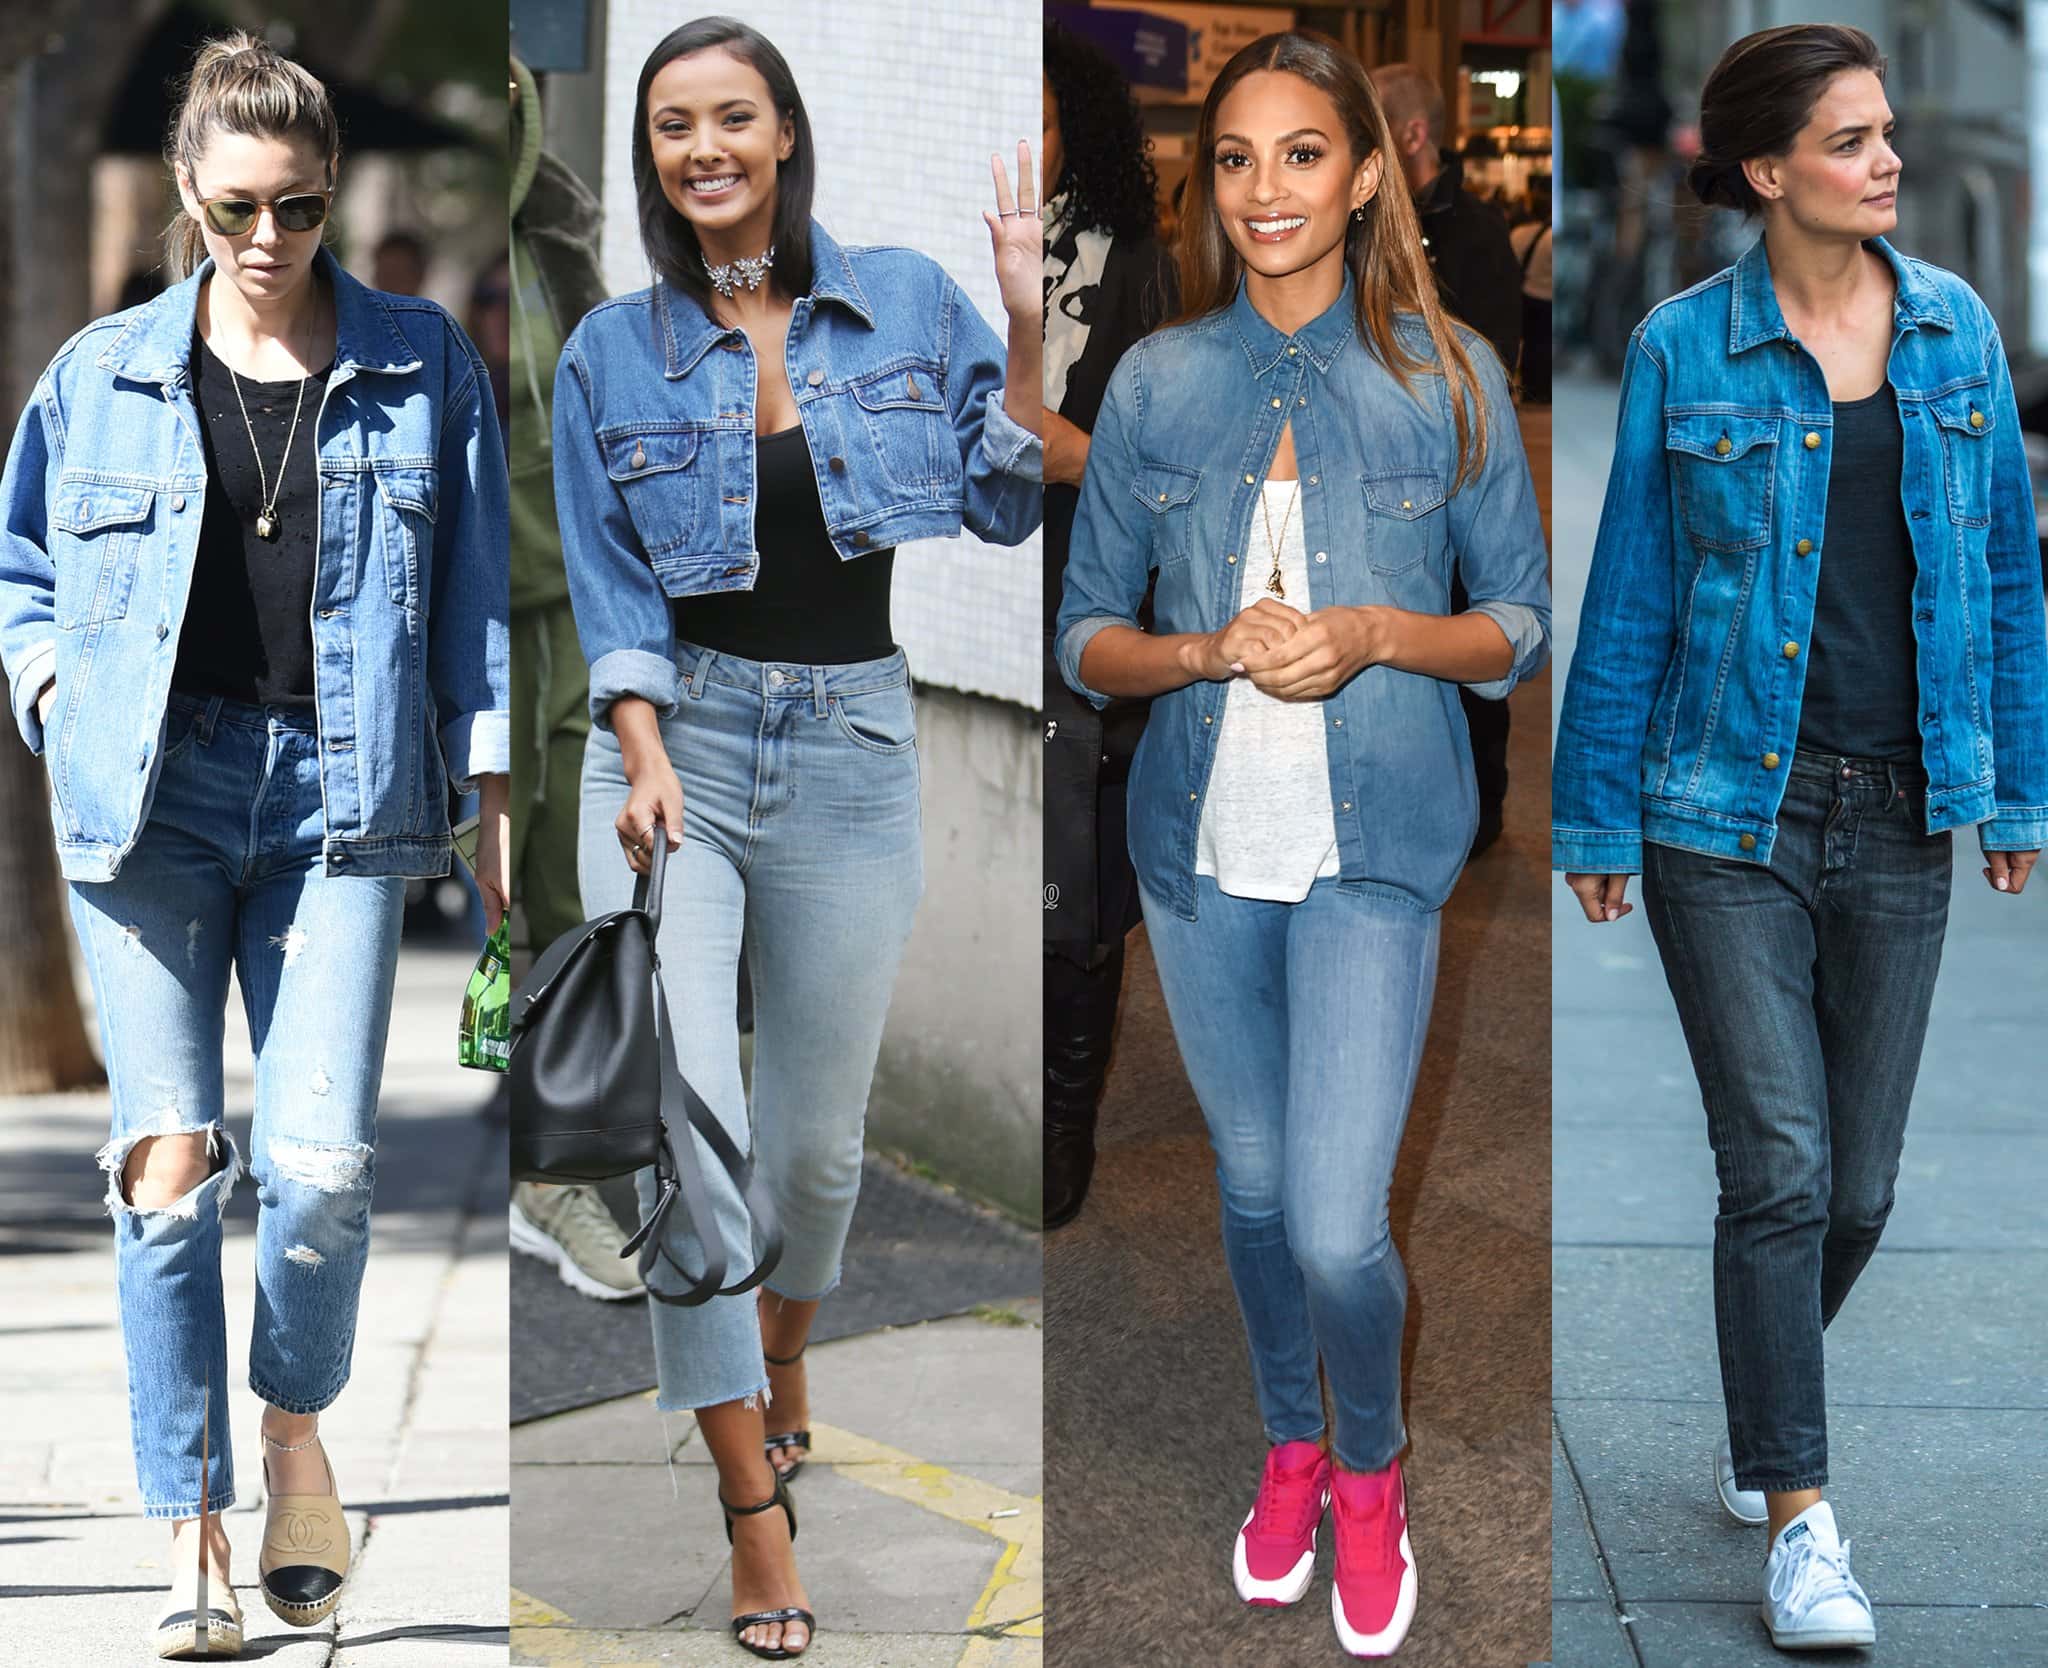 Celebrity Style Showcase: Jessica Biel, Maya Jama, Alesha Dixon, and Katie Holmes elegantly demonstrate the versatility of denim jackets paired with jeans, offering inspiration for this timeless fashion combination